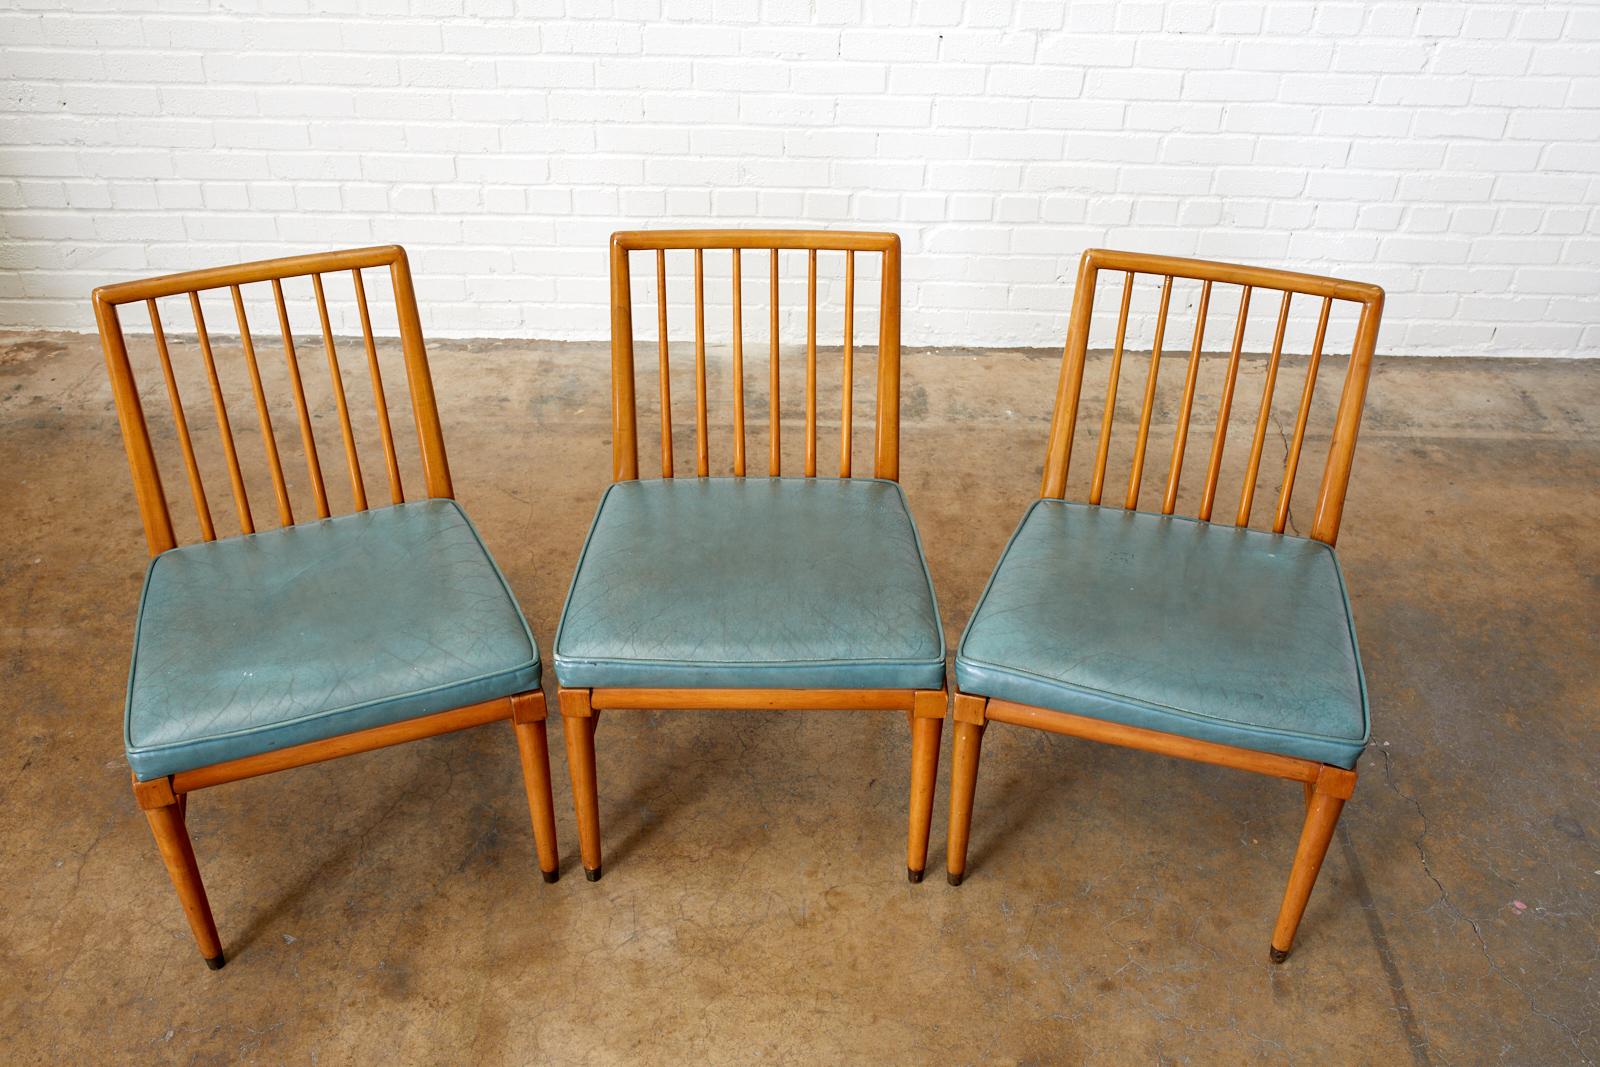 Set of Three Scandinavian Modern Spindle Back Chairs In Good Condition For Sale In Rio Vista, CA